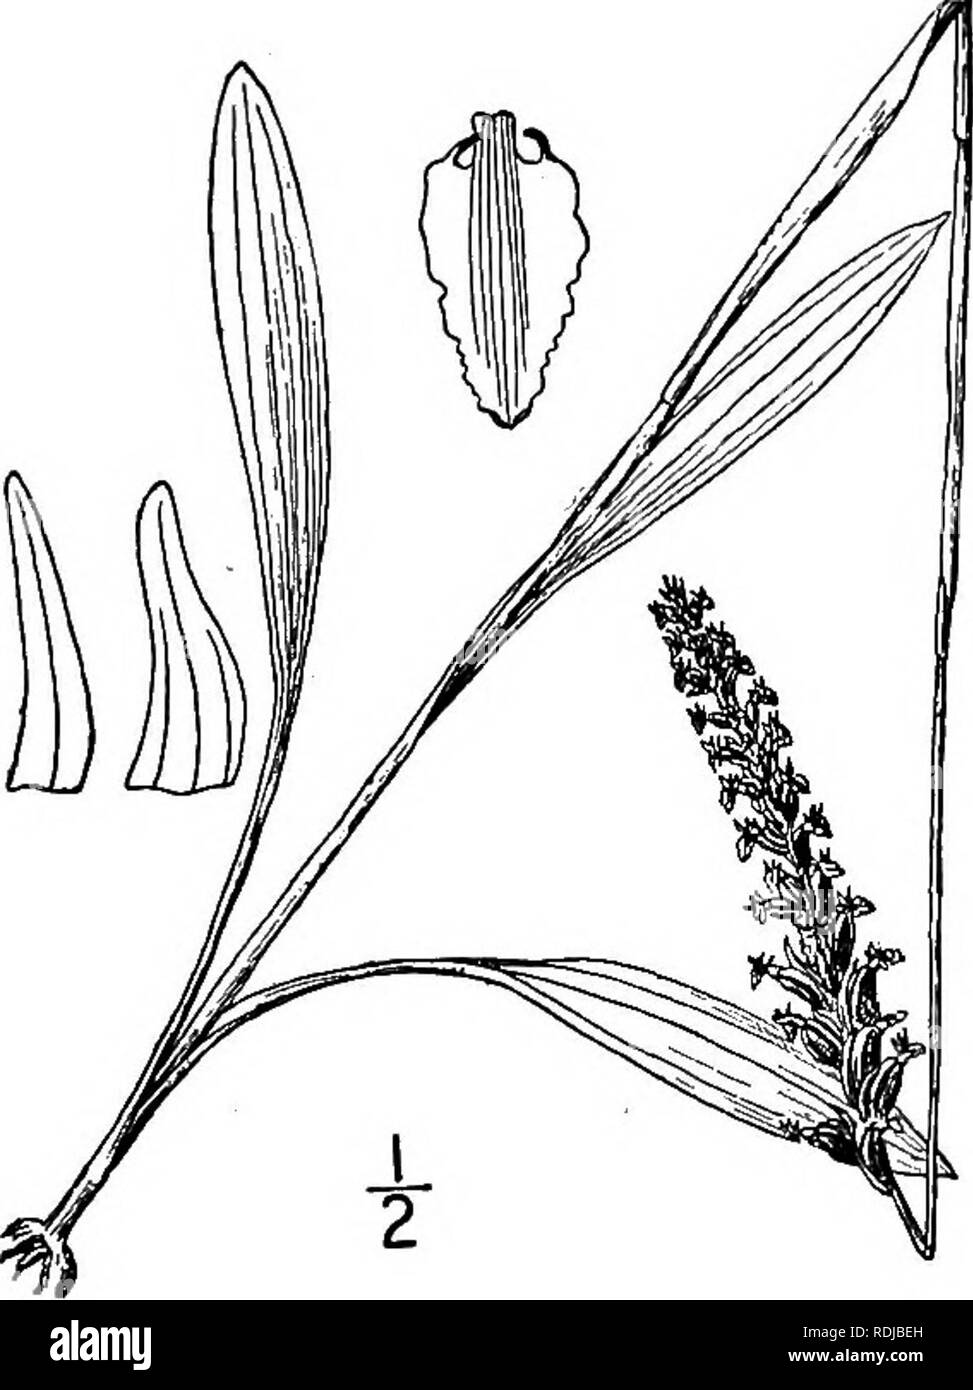 . An illustrated flora of the northern United States, Canada and the British possessions, from Newfoundland to the parallel of the southern boundary of Virginia, and from the Atlantic Ocean westward to the 102d meridian. Botany; Botany. 3. Ibidium cernuum (L.) House. Nodding or drooping Ladies'-tresses. Fig. 1391. Ophrys cernua L. Sp. PI. 946. 1753. Spiranthes cernua L. C. Rich. Orch. Ann. 37. 1817. Gyrostachys cernua Kuntze, Rev. Gen. PI. 664. 1891. Spiranthes odorata Lindl. Gen. &amp; Sp. Orch. 467. 1840. Gyrostachys ochroleuca Rydb. in Britton, Man. 300. 1901. /. incurvum Jennings, Ann. Car Stock Photo